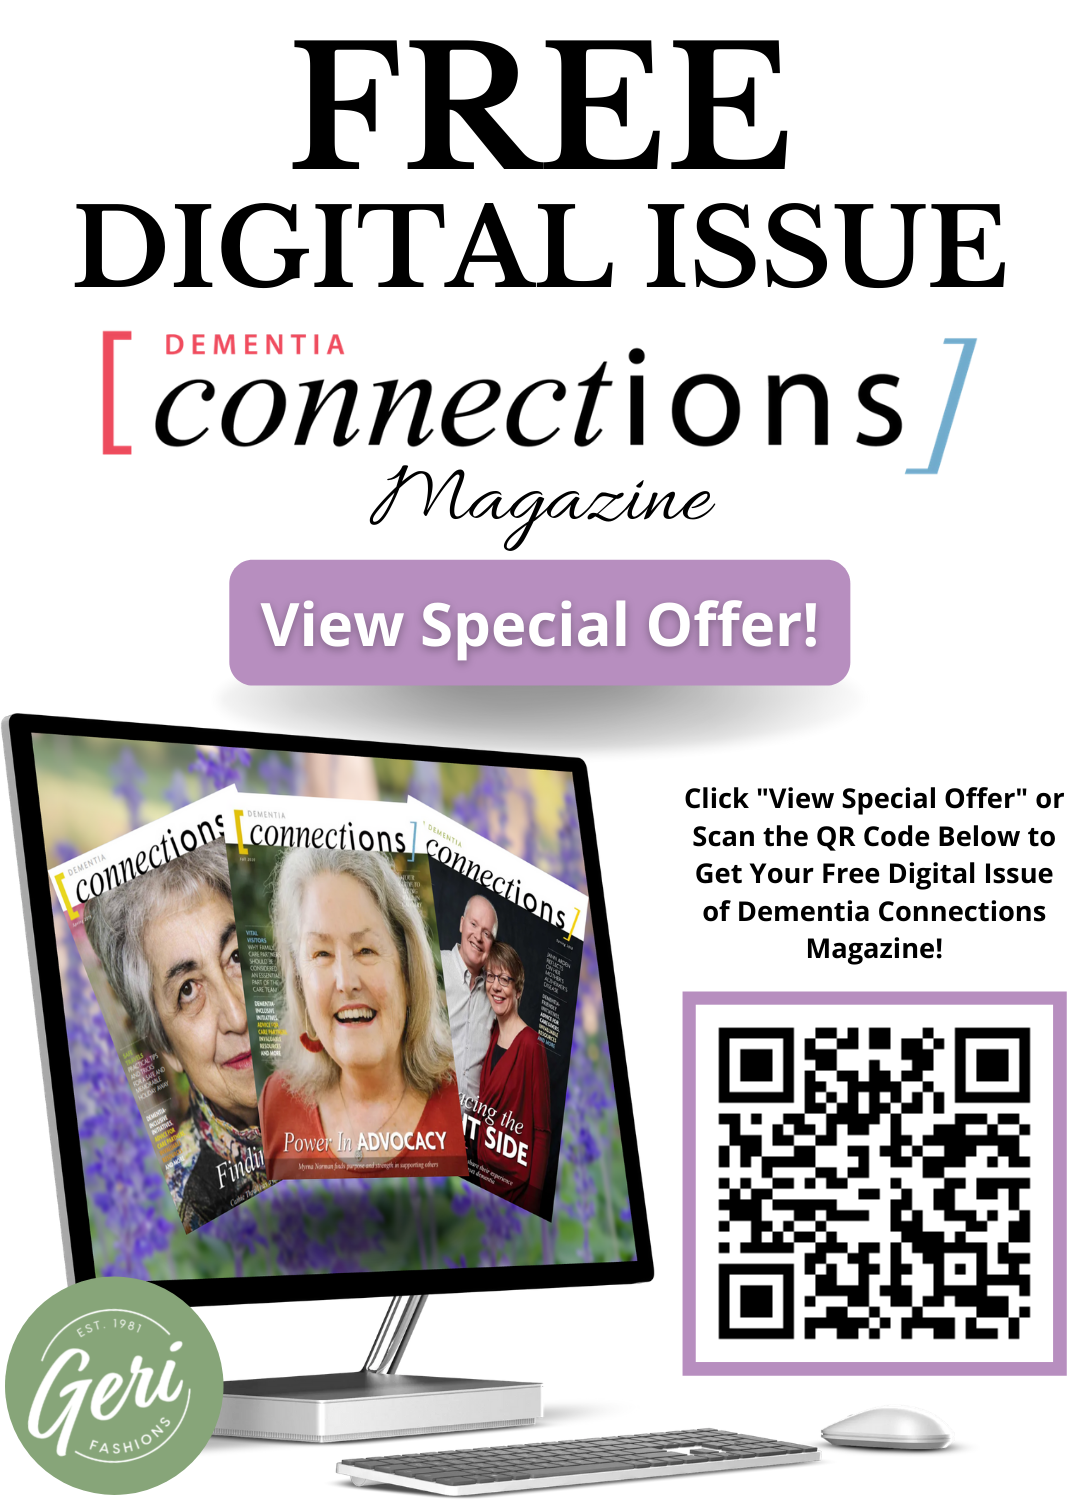 Geri Fashions Special Offer - Free Digital Issue of Dementia Connections Magazine